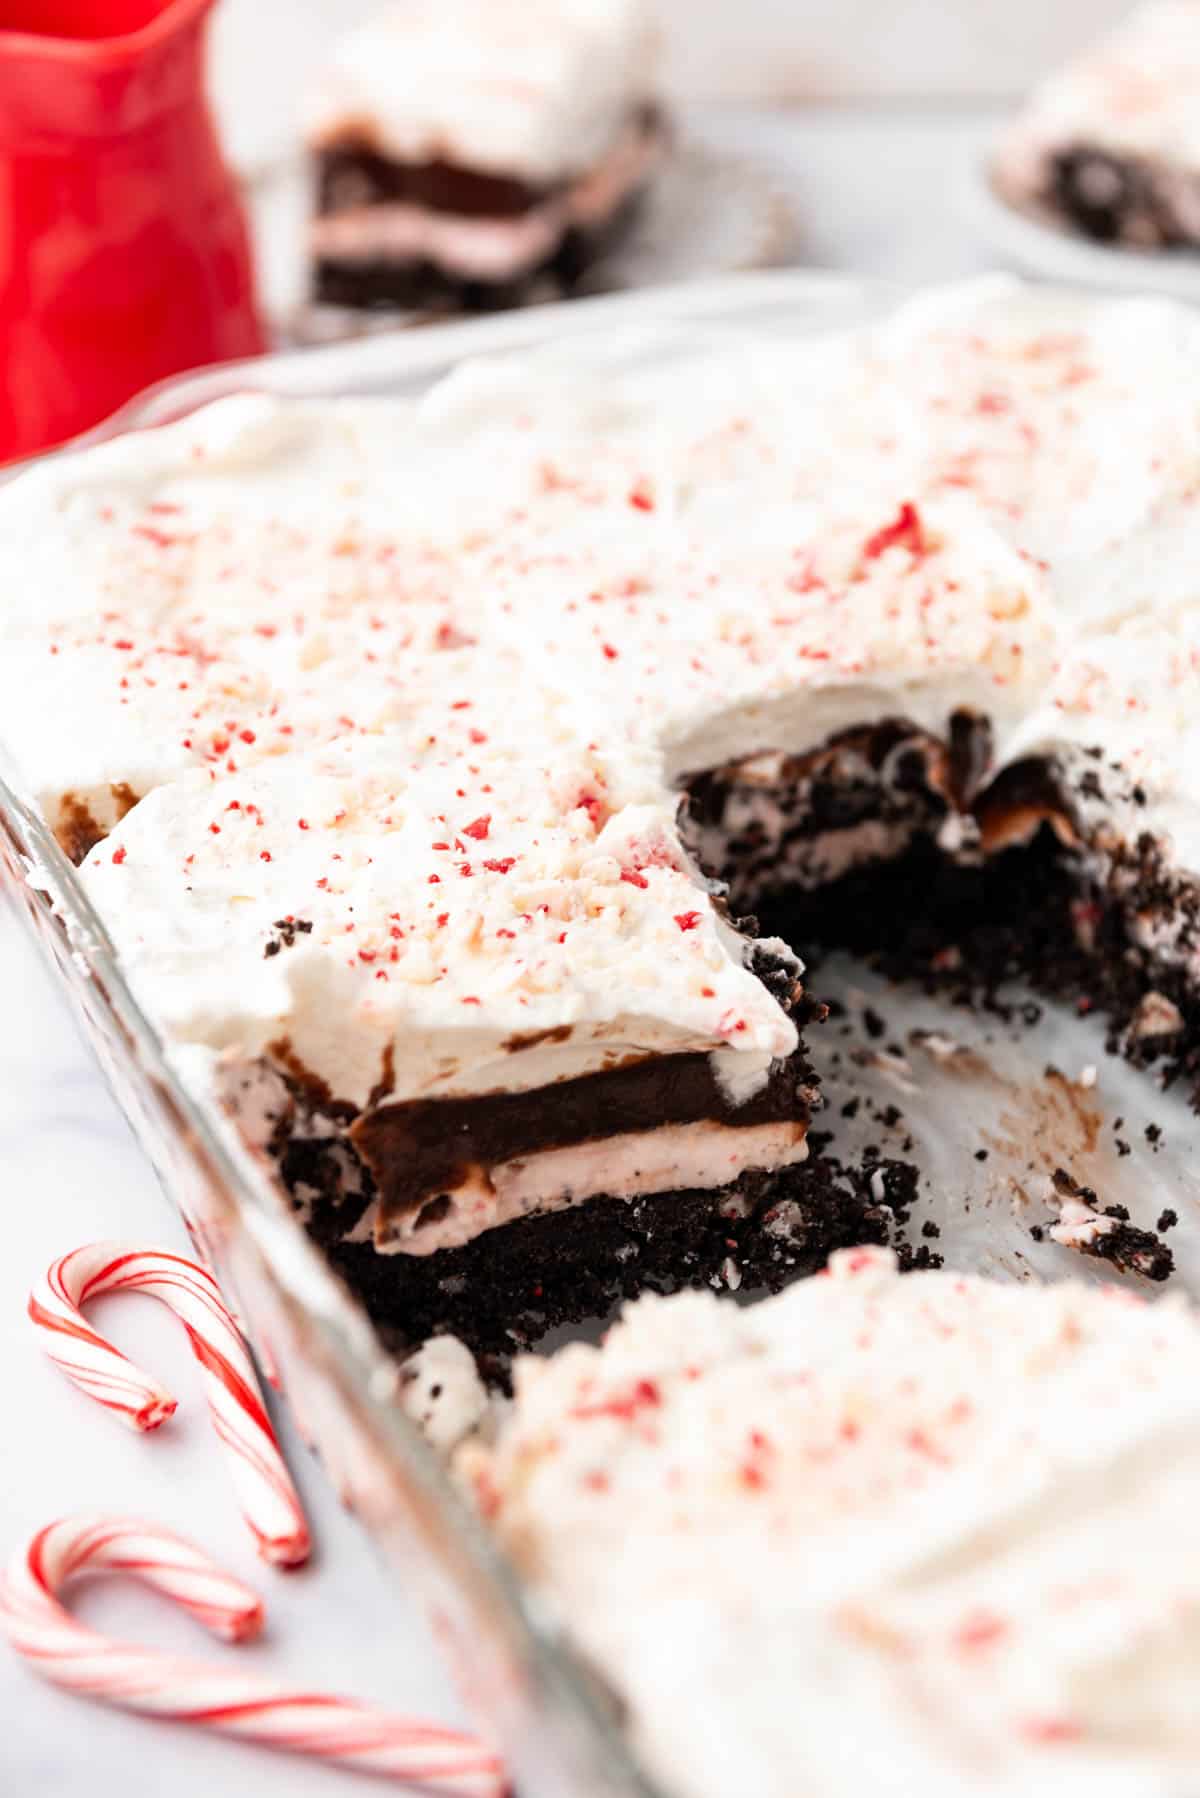 A side view of chocolate peppermint lasagna with some slices removed.